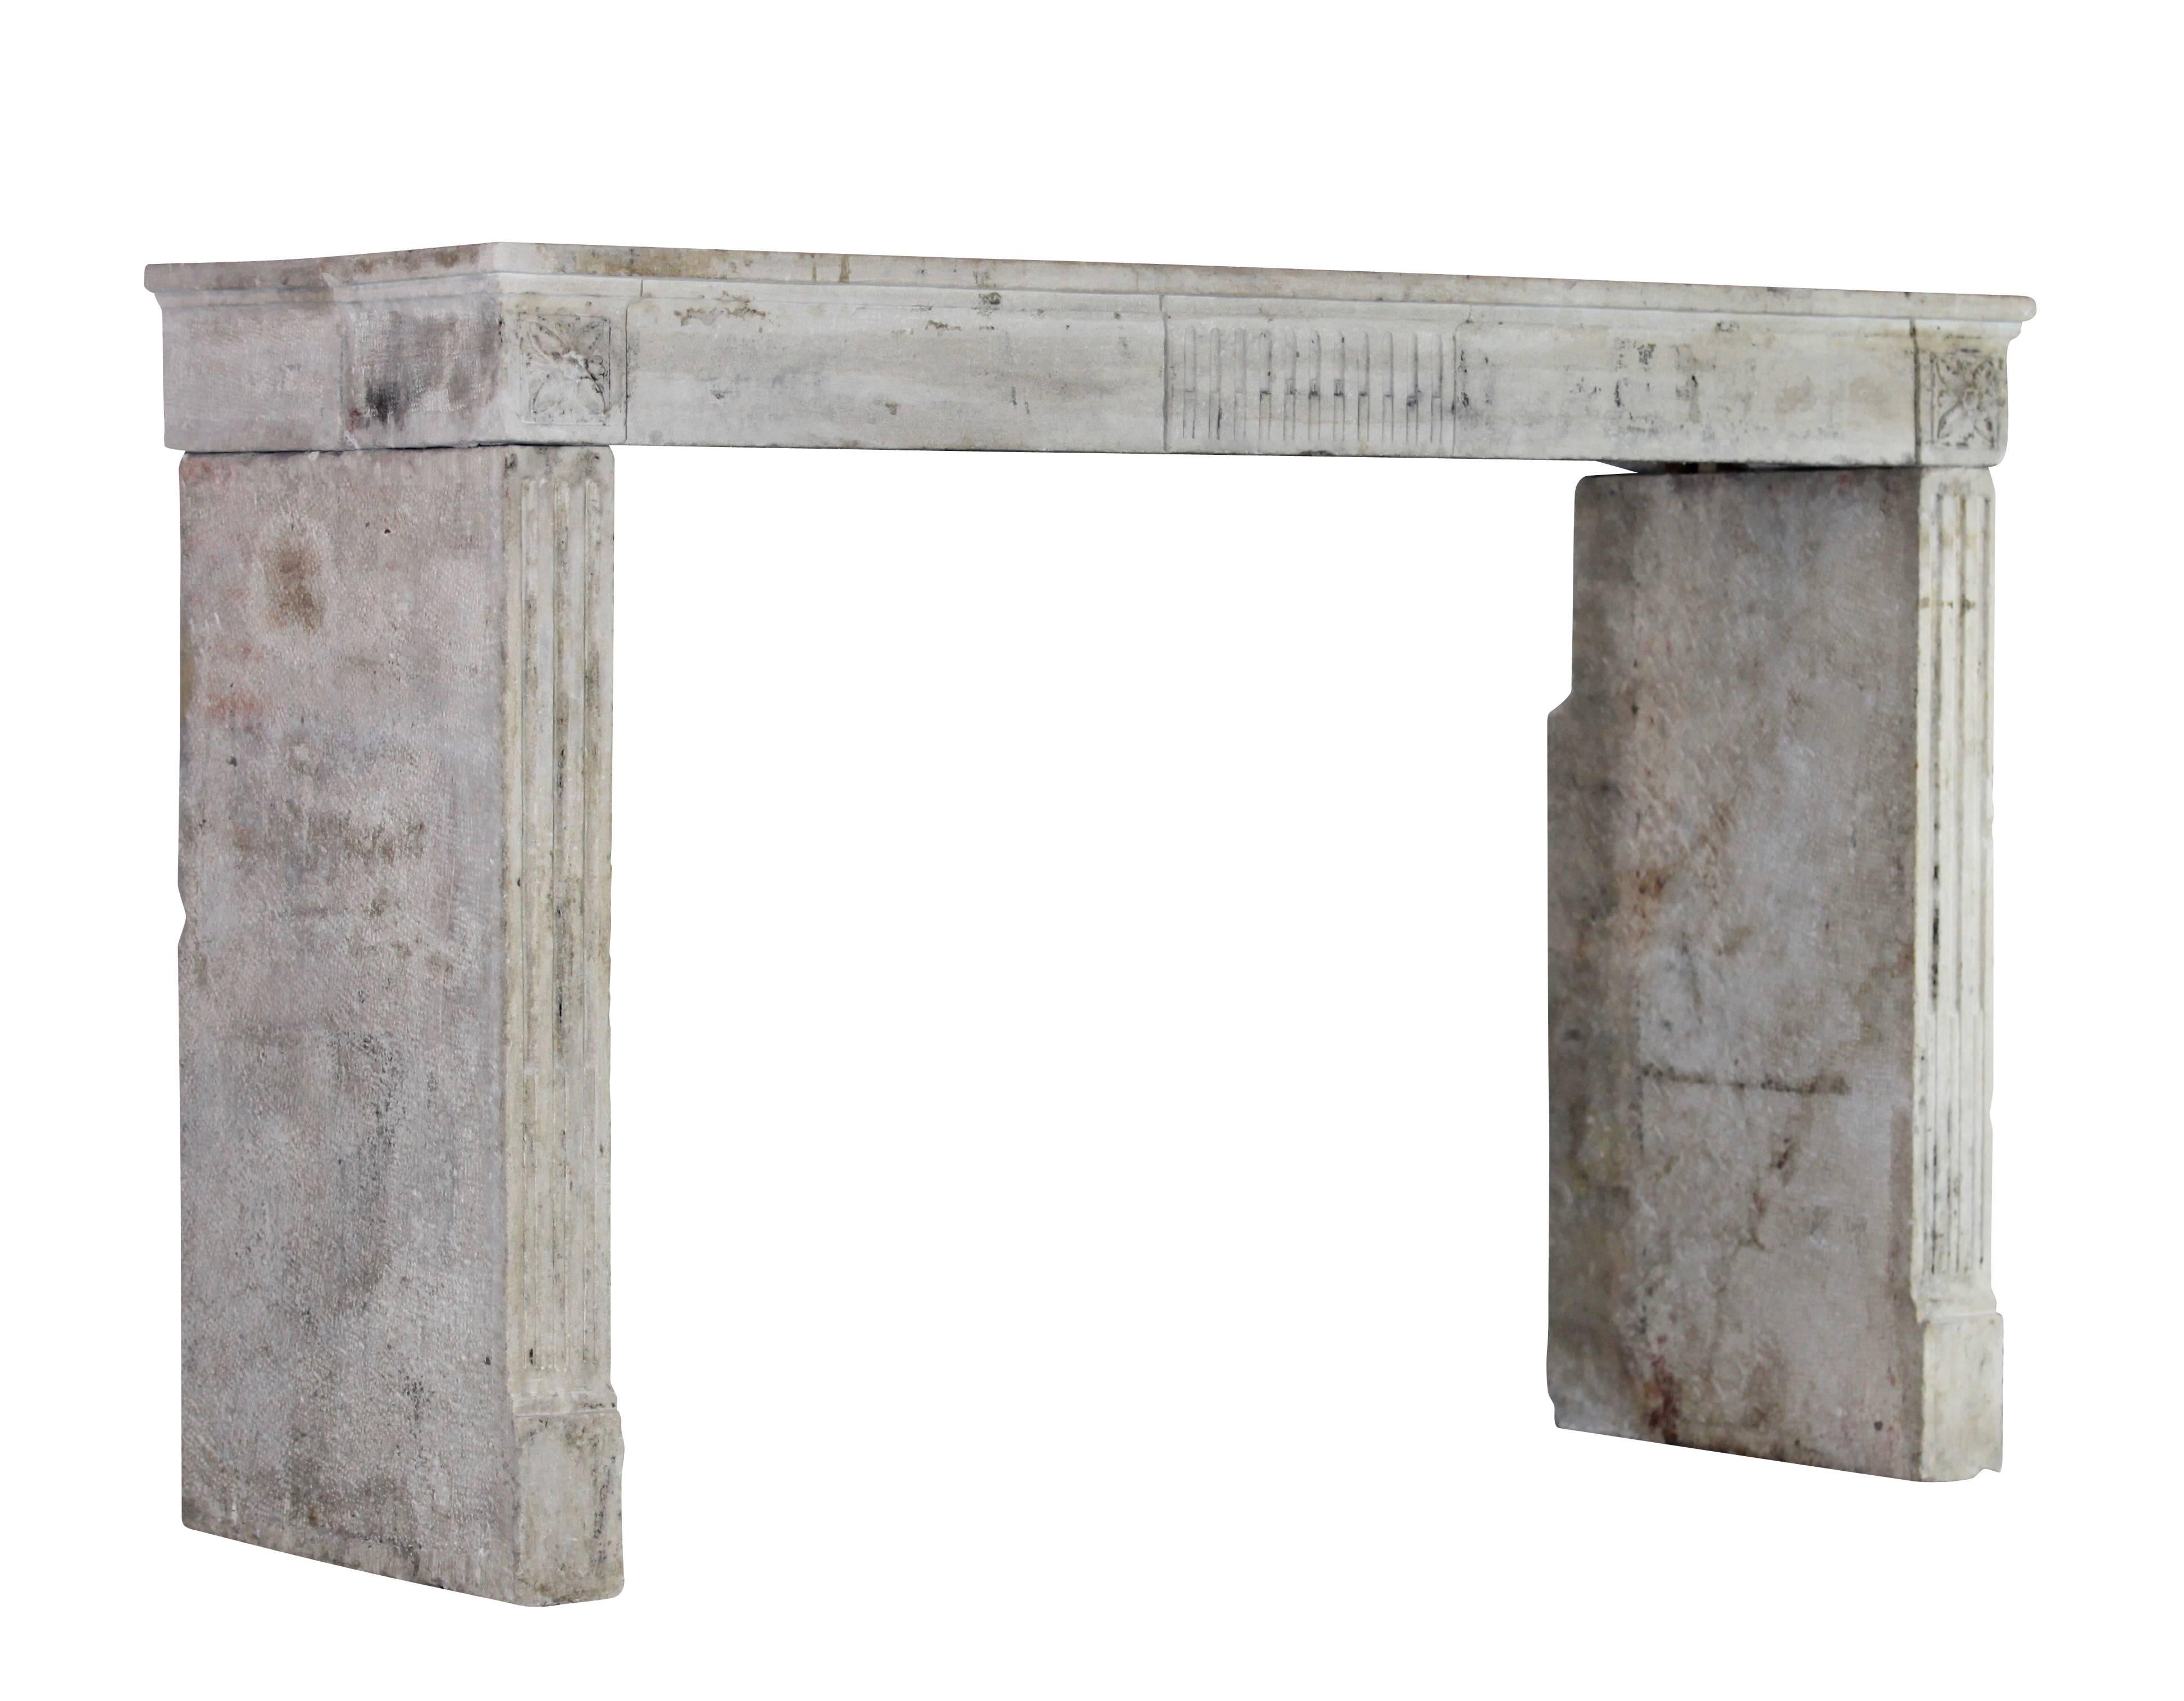 This very nice French country limestone fireplace surround carries still some original patina. The mantel has deep legs with deep retours. This is a typical fine LXVI period mantel.
18th century.
Measures:
178 cm EW 70.08